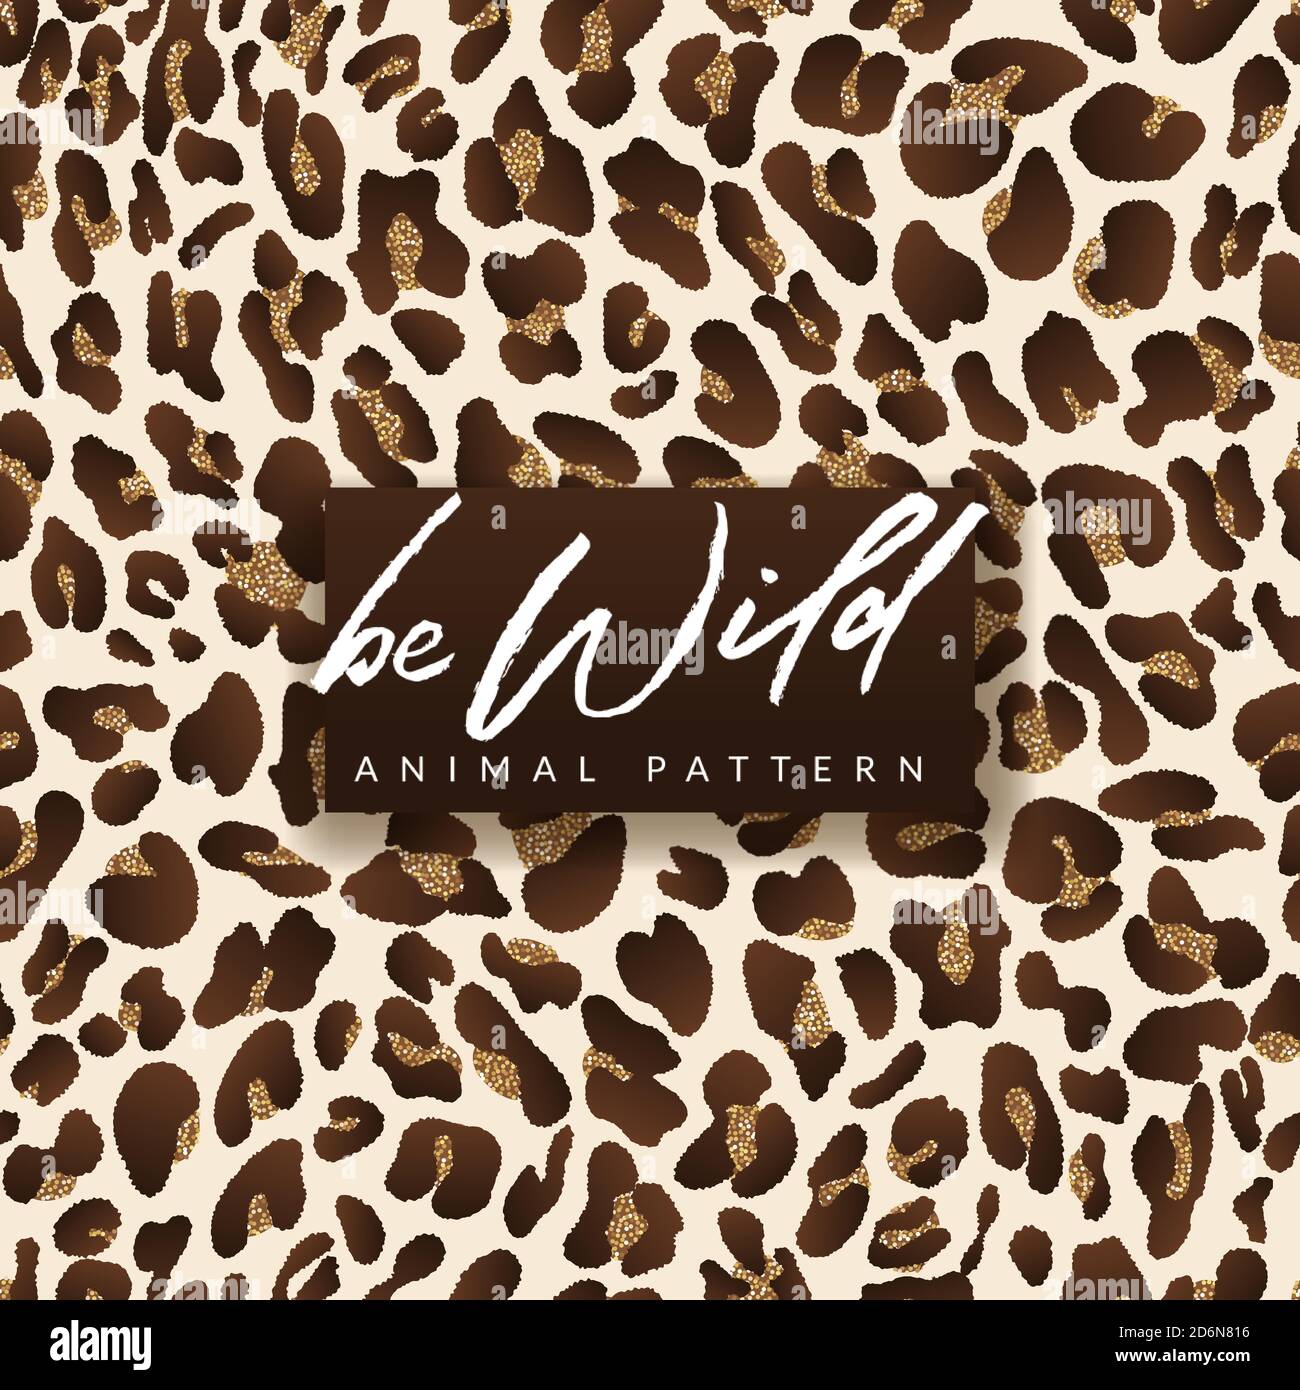 Leopard vector golden seamless pattern. Trendy fashion textile print design in gold shiny colors. Animal fur background with glitter texture. Be wild Stock Vector